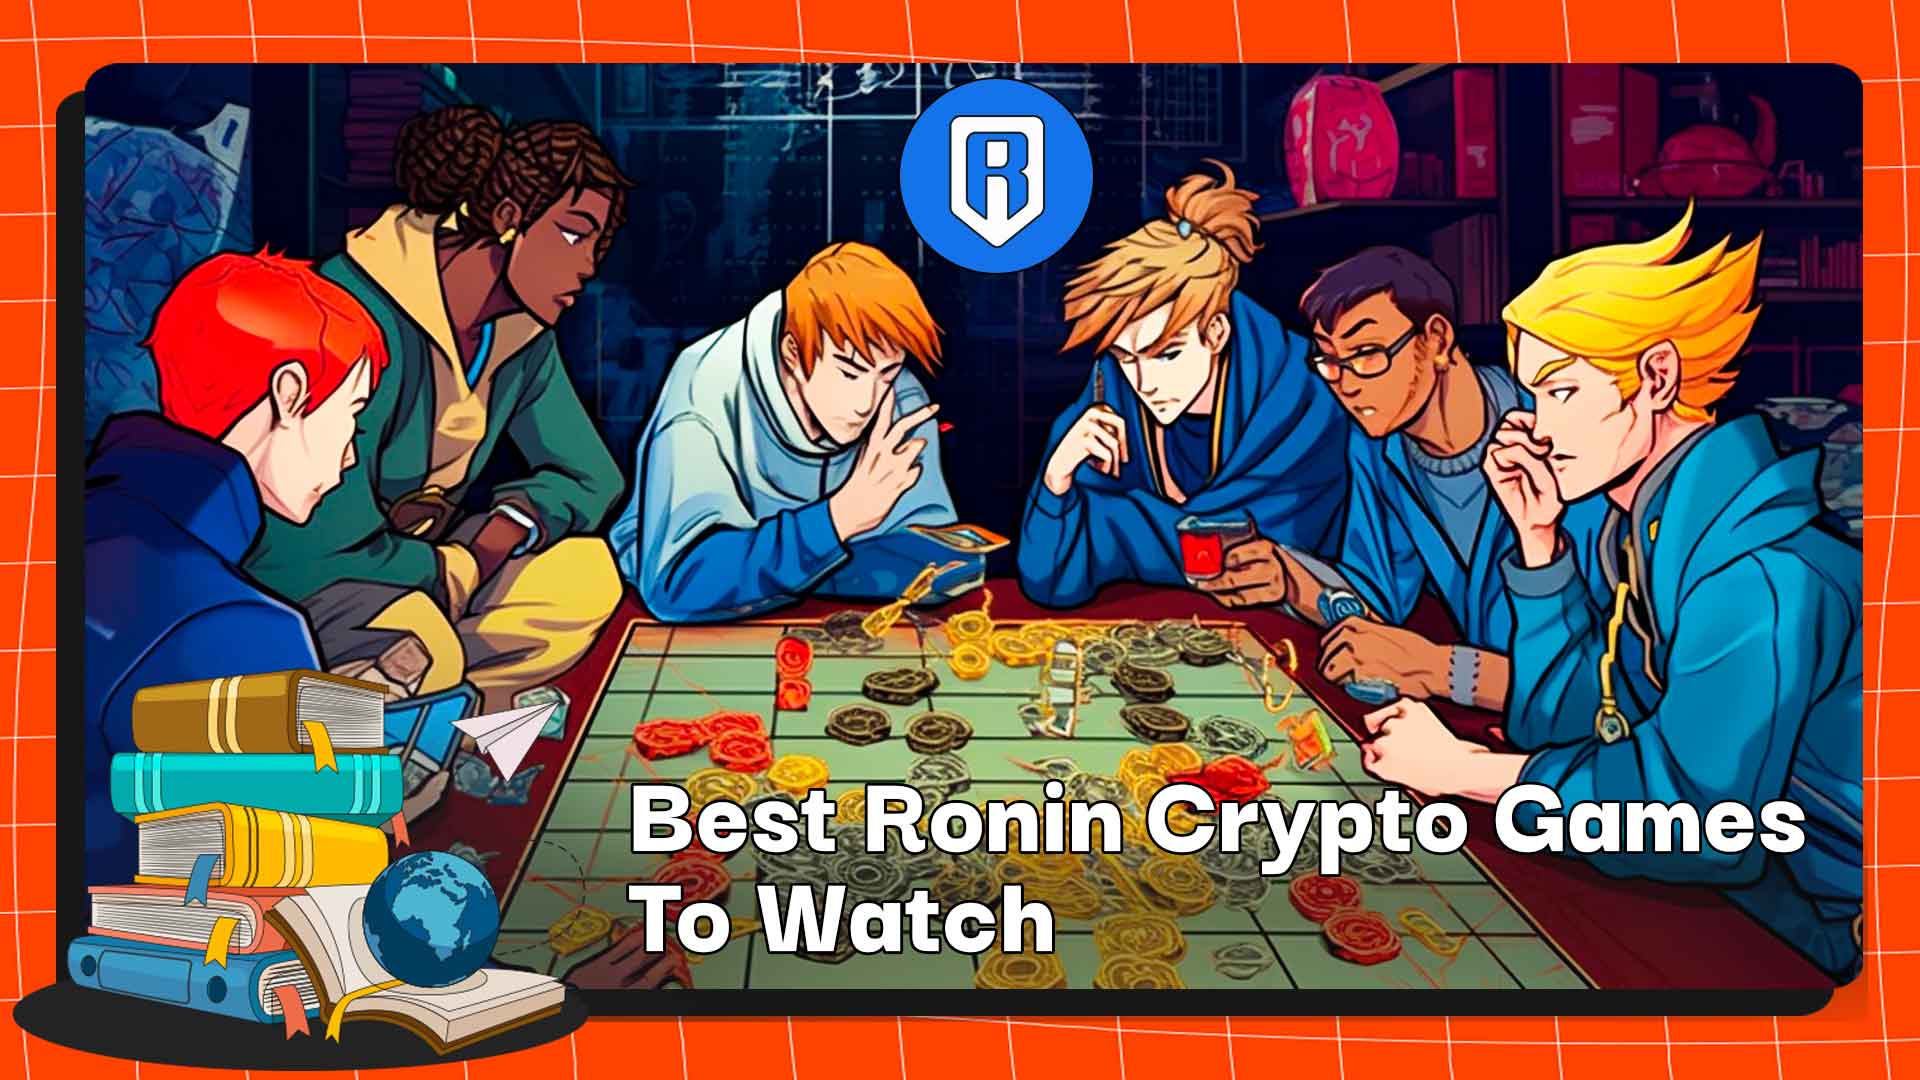 Best Ronin Crypto Games To Watch